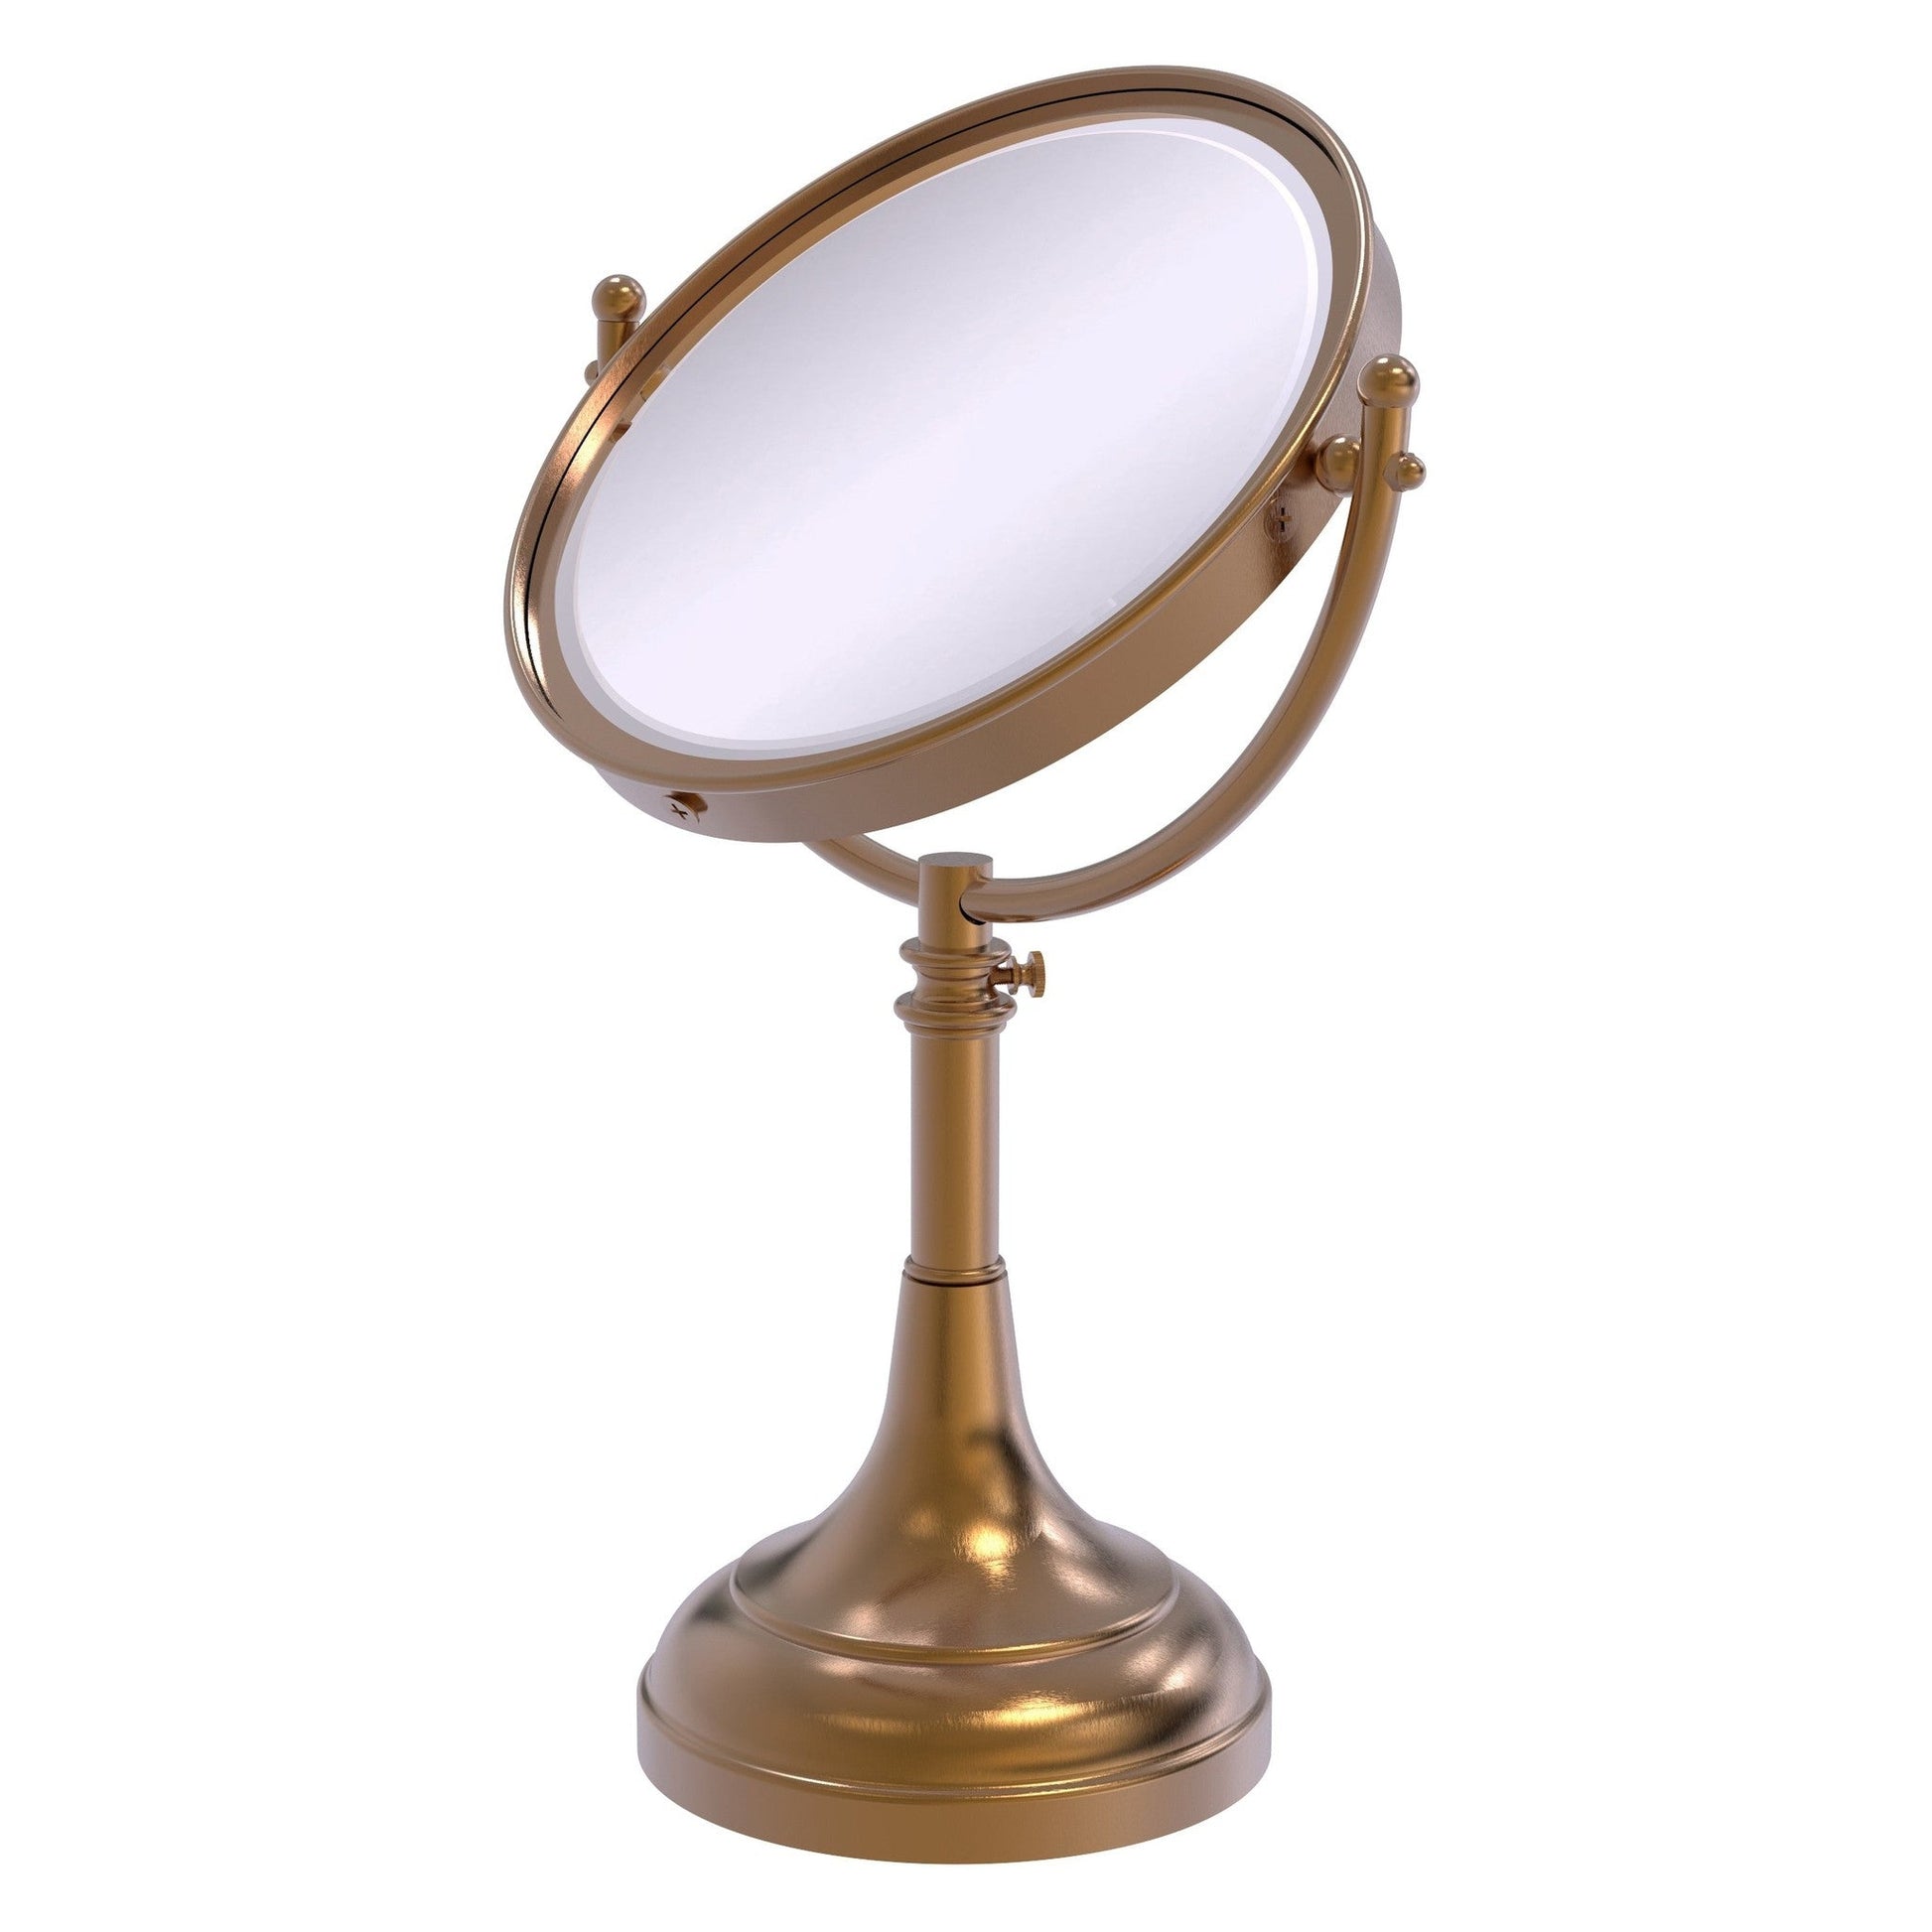 Allied Brass DM-1/4X 8" x 8" Brushed Bronze Solid Brass Vanity Top Make-Up Mirror 4X Magnification